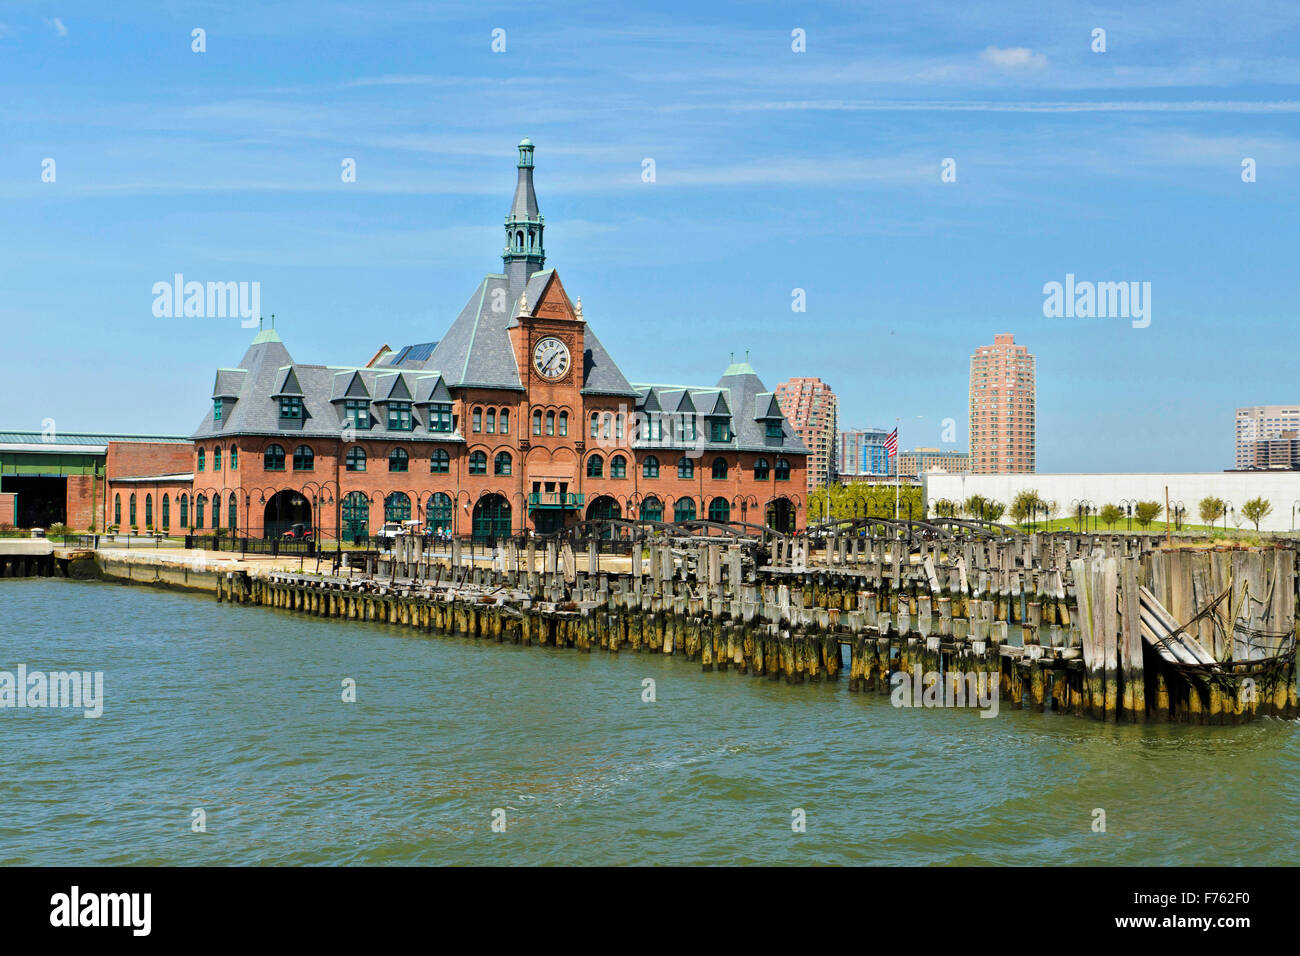 Central railroad of new jersey terminal, new york, usa Stock Photo